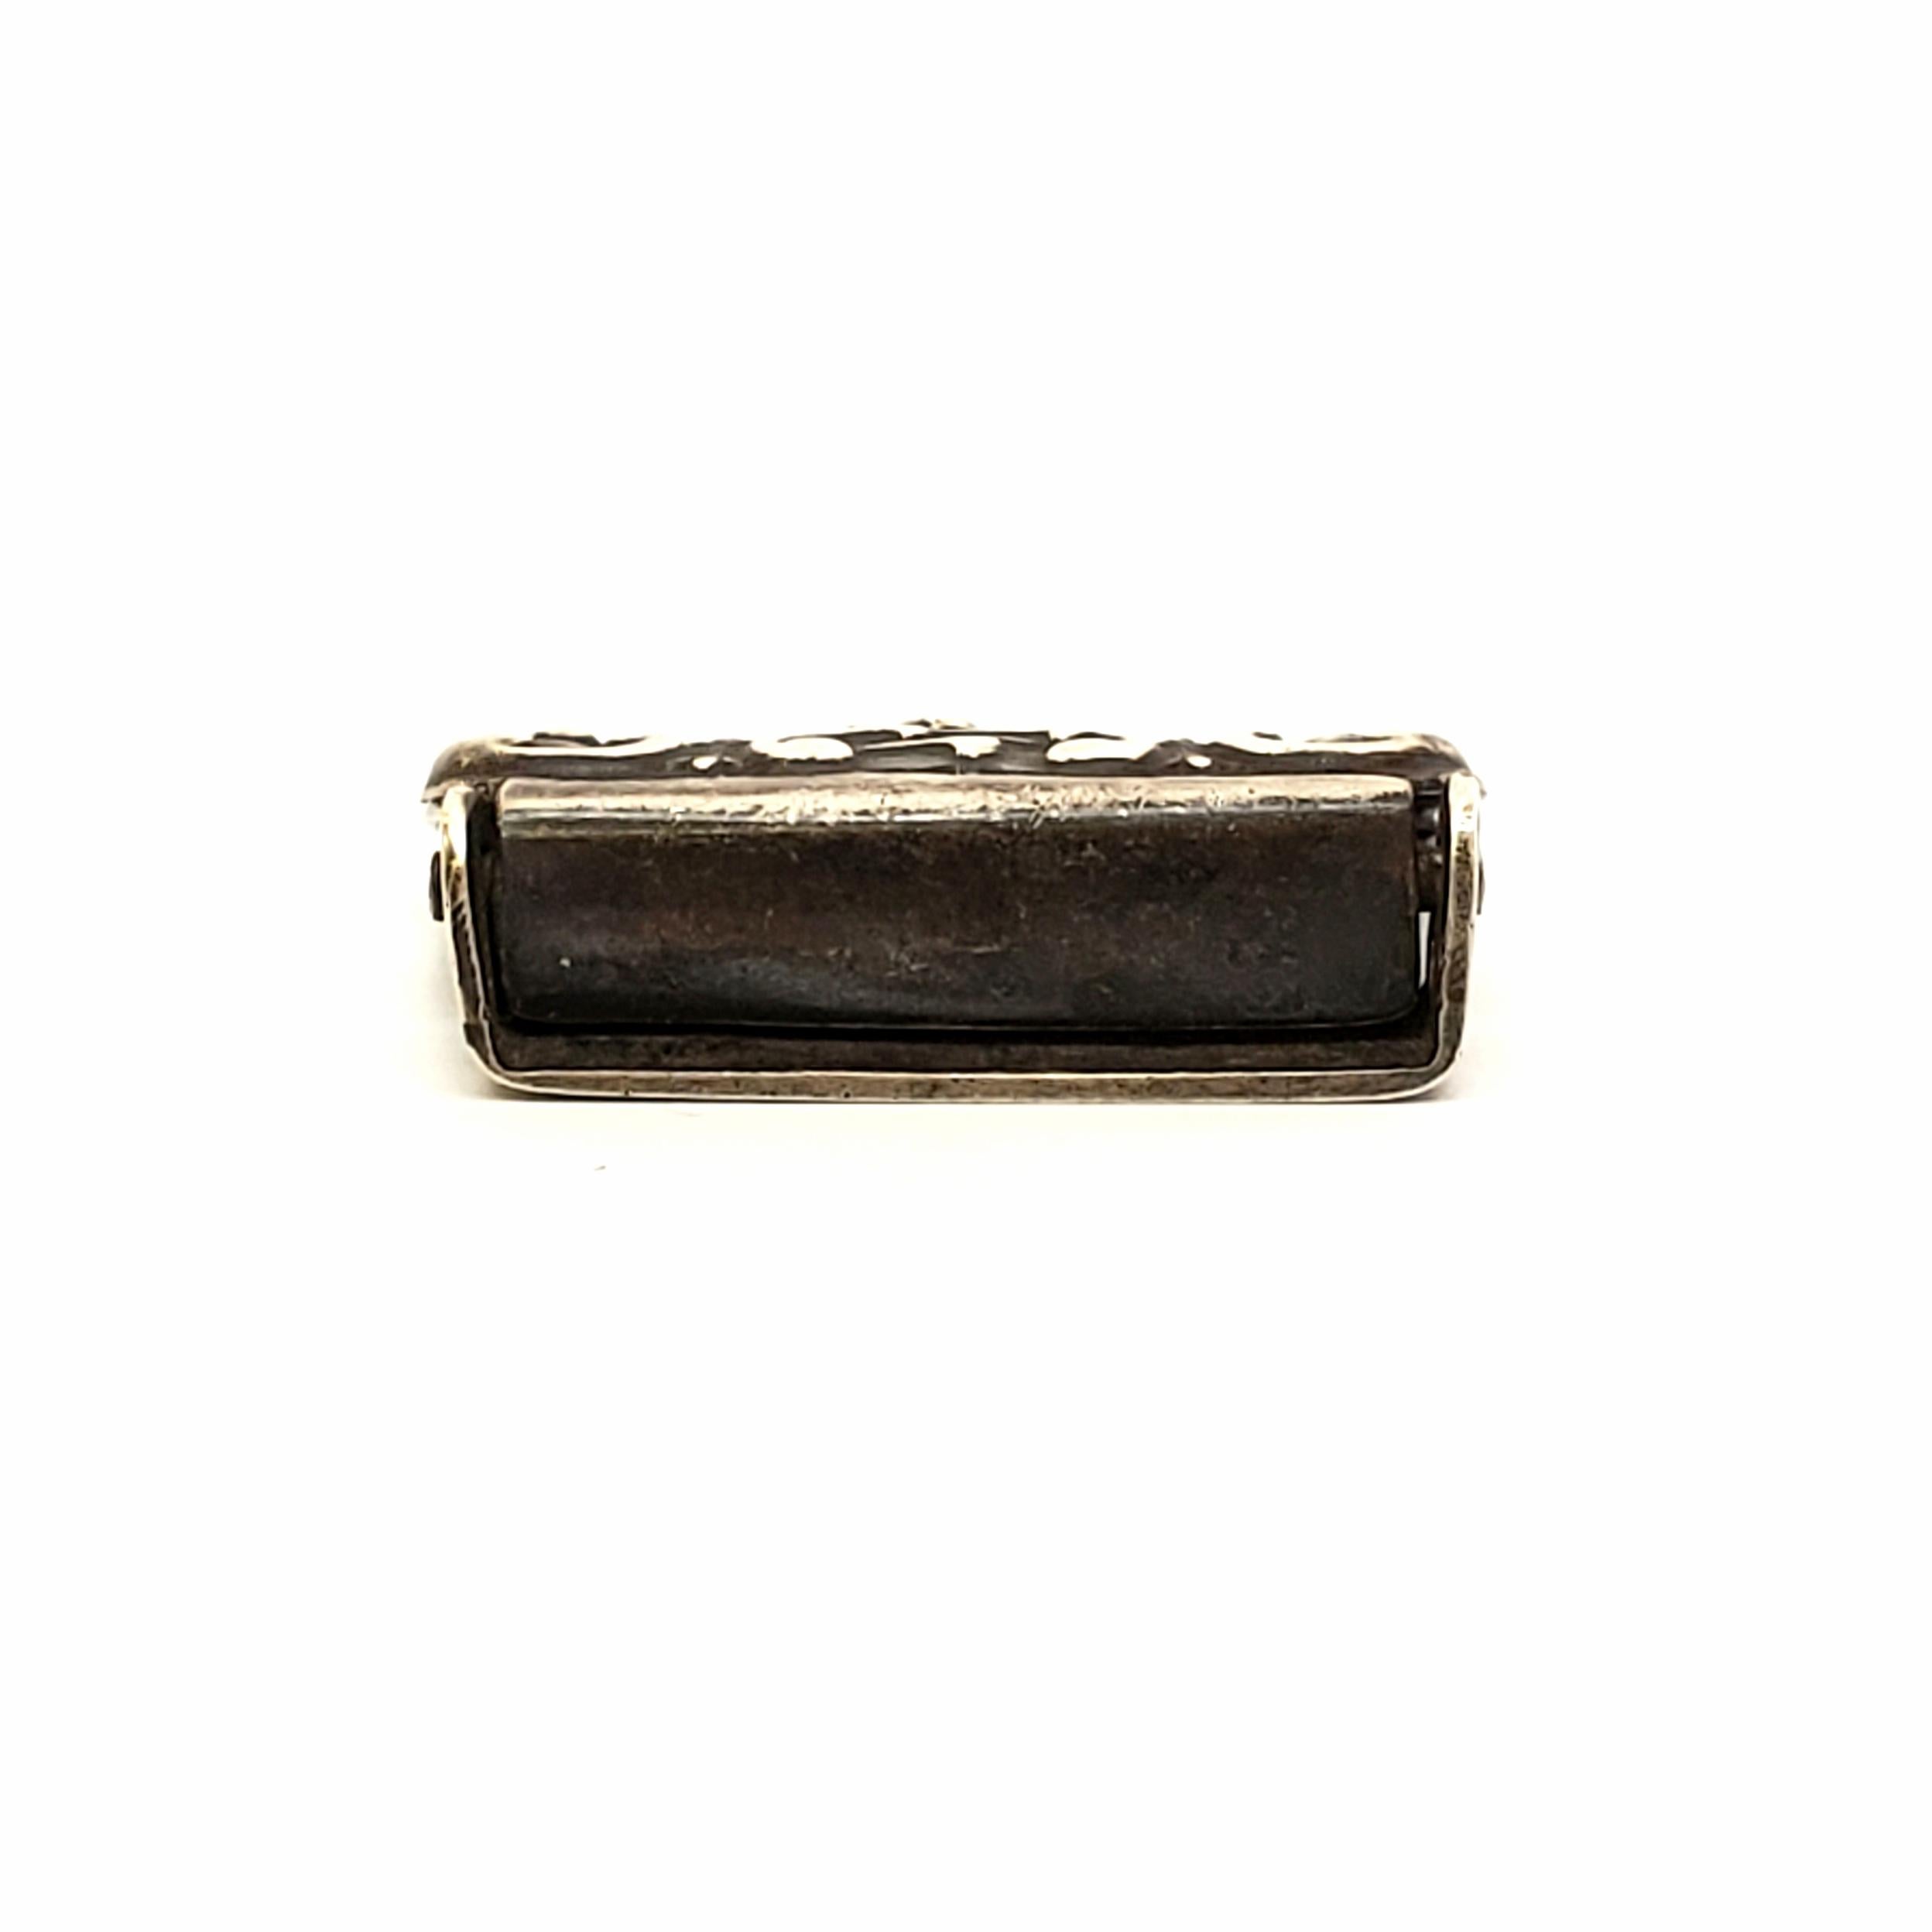 Tiffany & Co. Sterling Silver Belt/Sash Buckle with Monogram In Good Condition For Sale In Washington Depot, CT